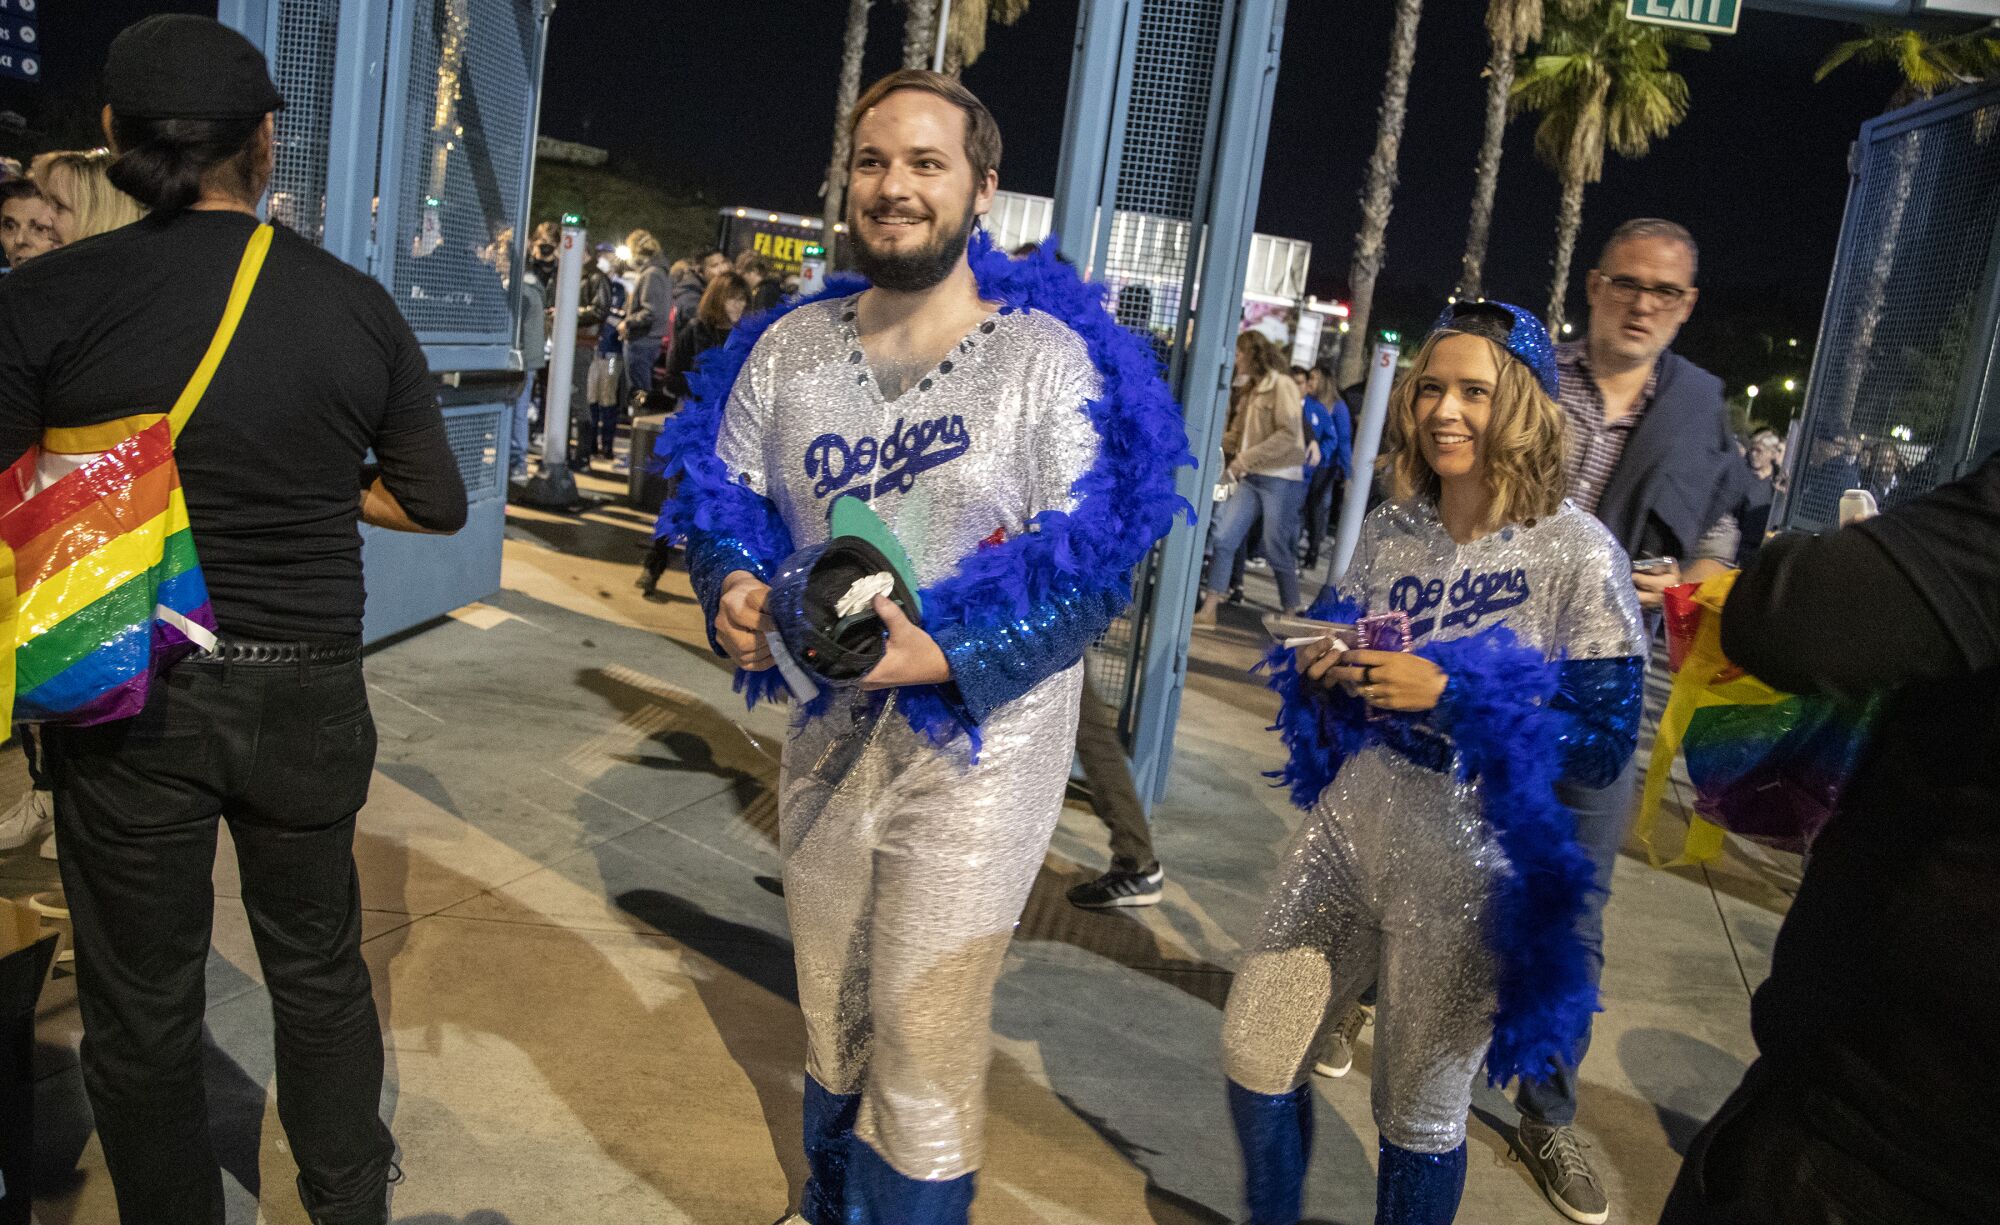 A man and woman dressed as the Shiny Dodger and matching blue feathered boas.